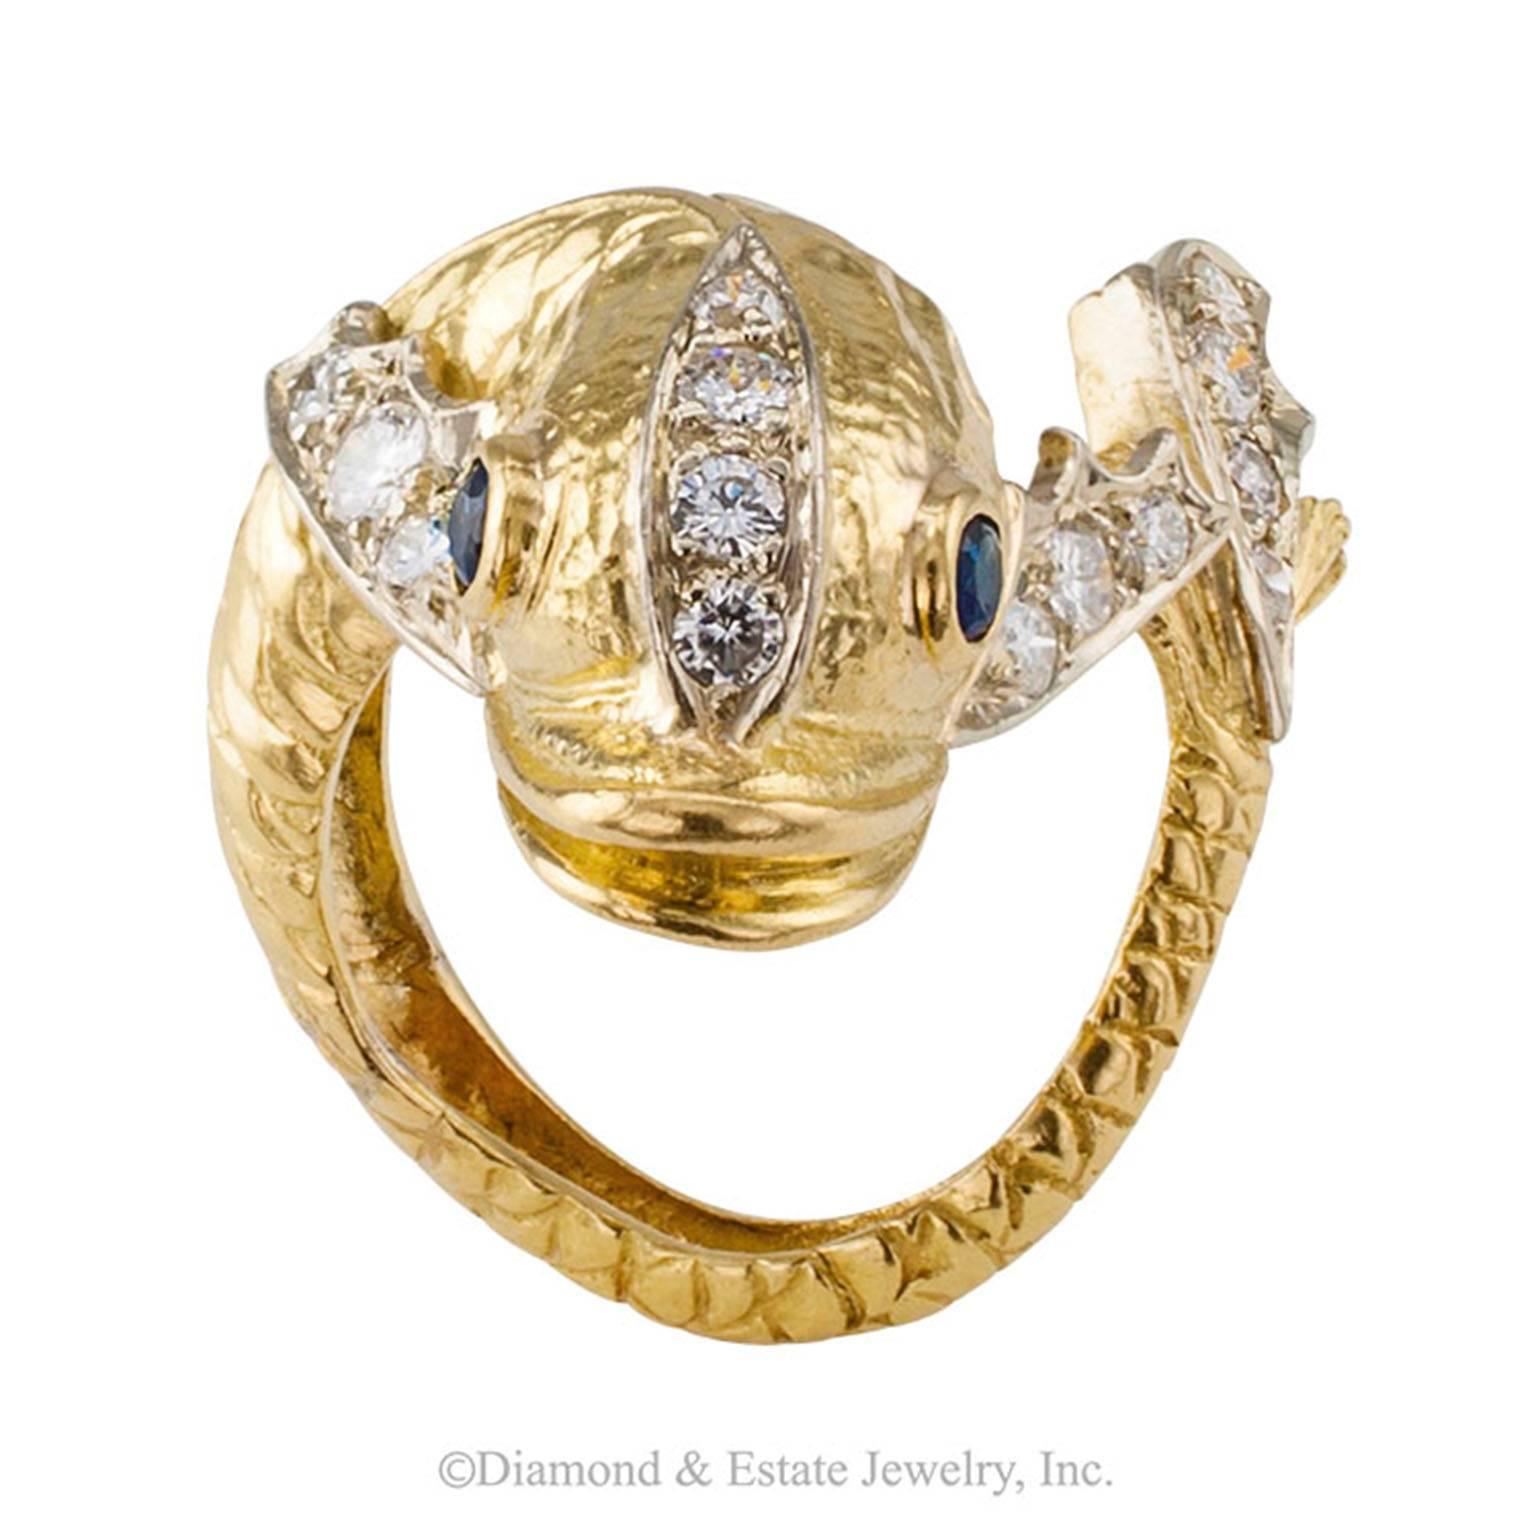 Wrap-around-the-finger Diamond and Sapphire Fish Ring

Whimsical diamond, sapphire and 18-karat gold fish ring, circa 1970.  A full body fish, its head rests on top of the finger while its body curls completely around it to reveal its diamond tail